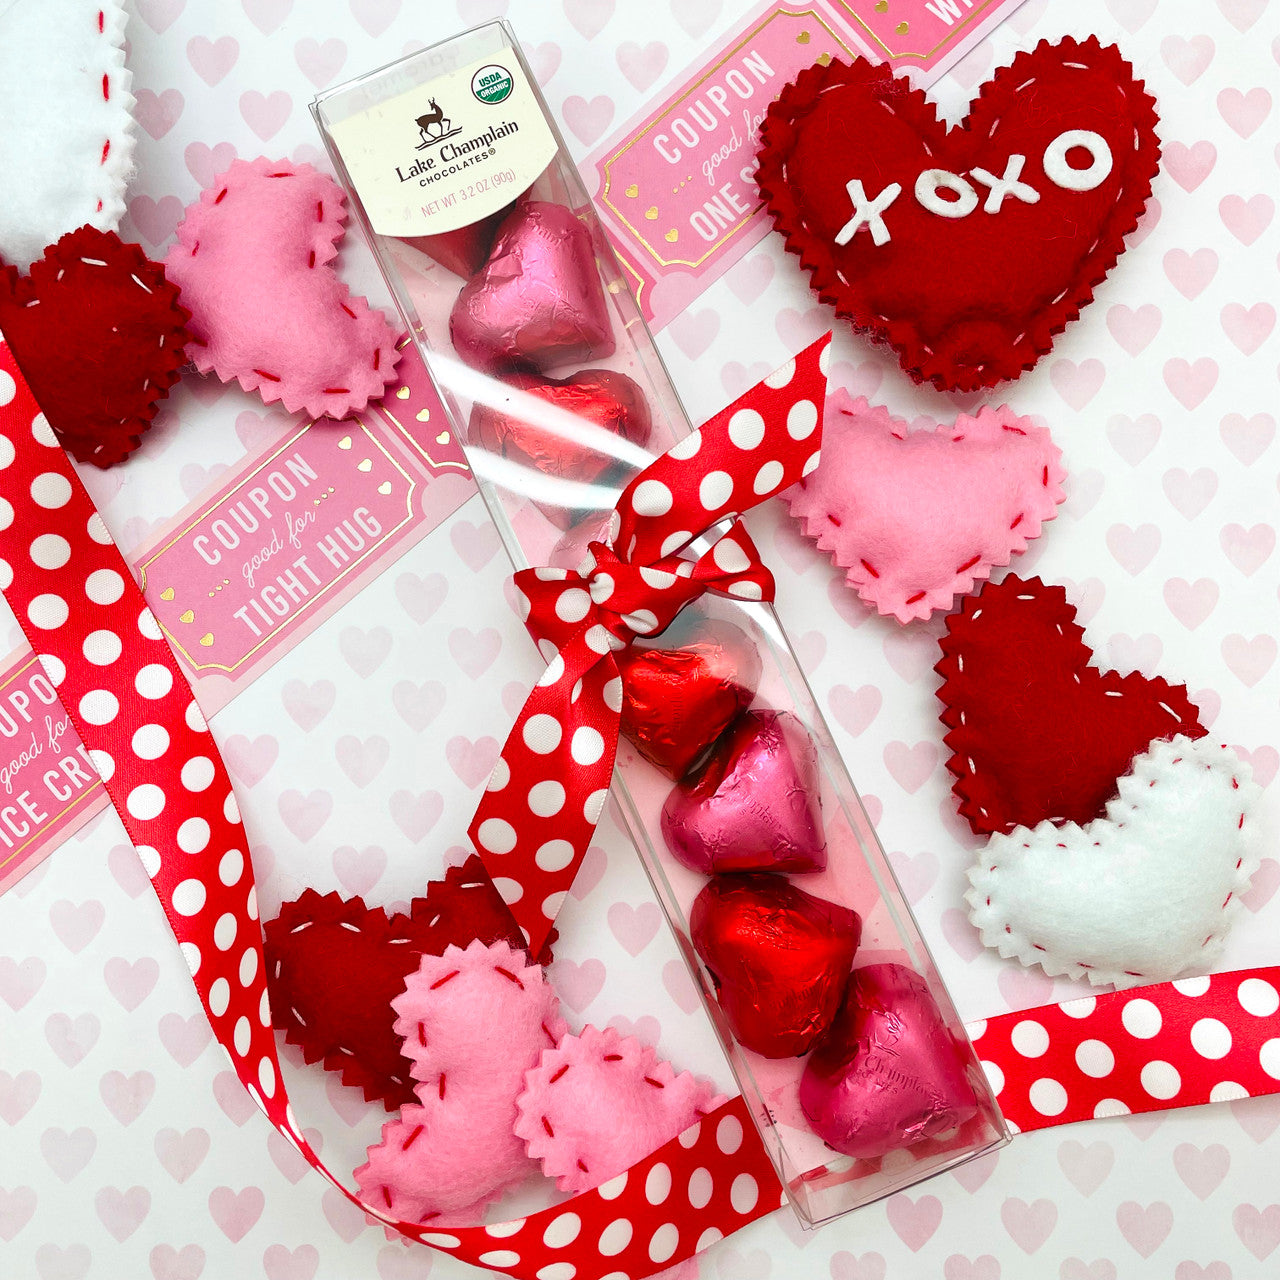 Tie your Valentine's gift with this fun ribbon!